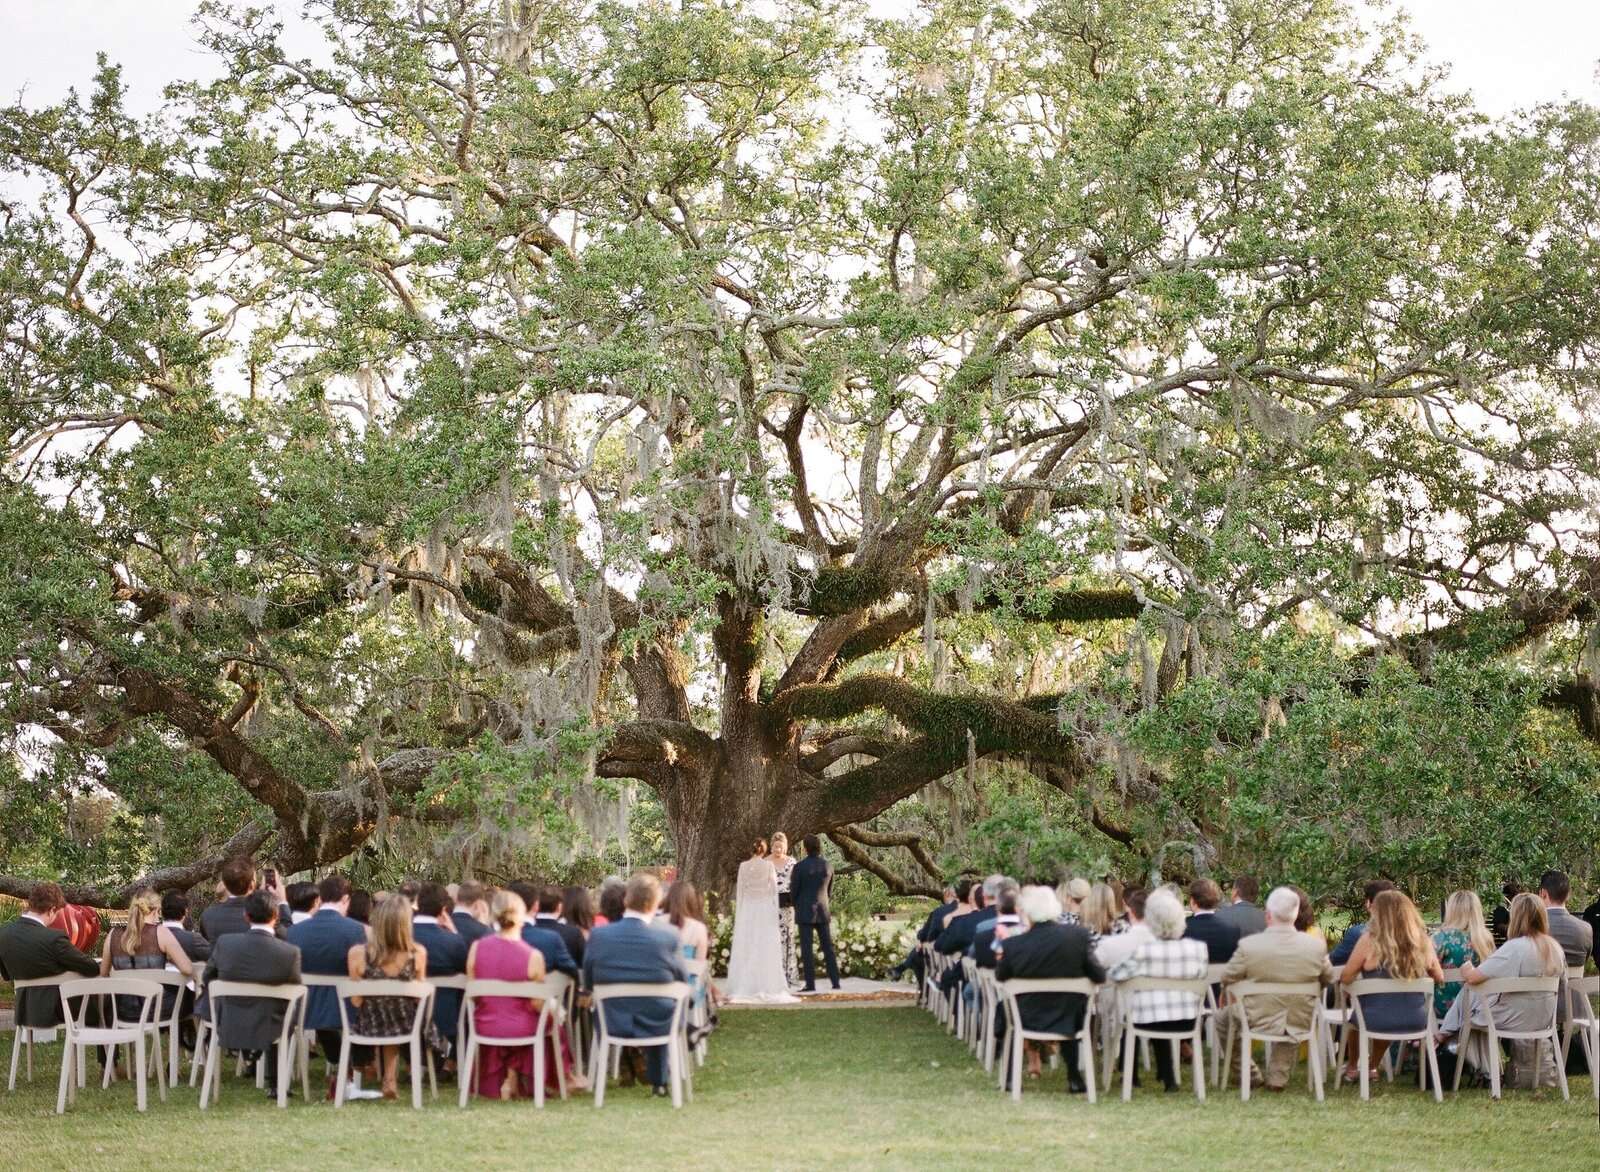 Sarah and George traded vows amid towering oak trees in a lavish wedding planner by Vogue Top Planner and Designer Michelle Norwood